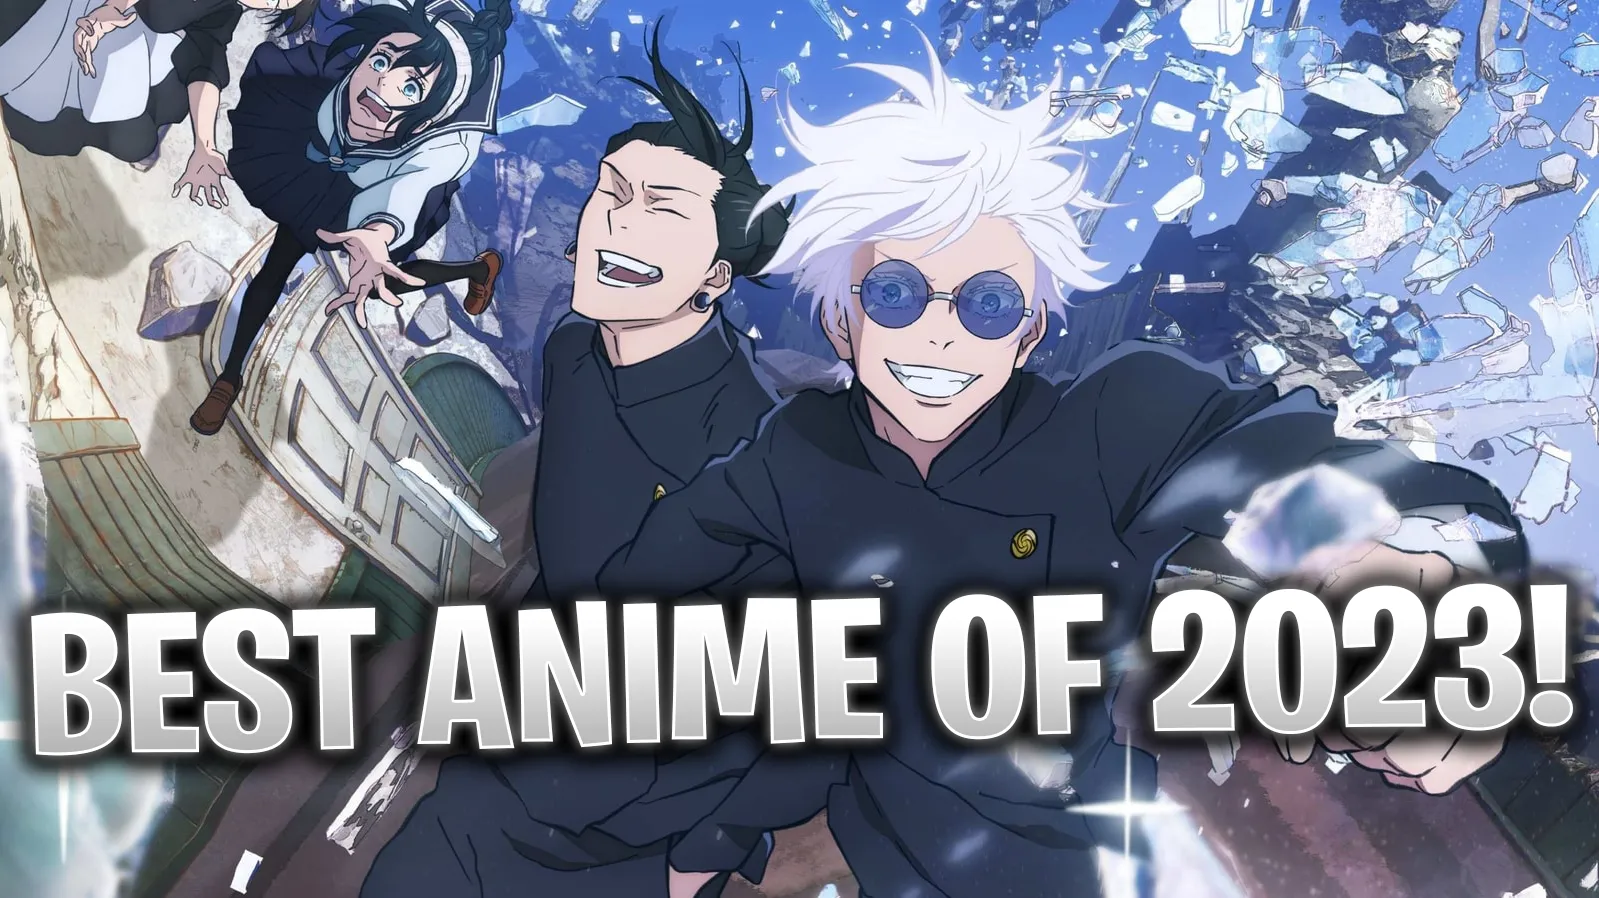 The Biggest Anime Coming in 2023